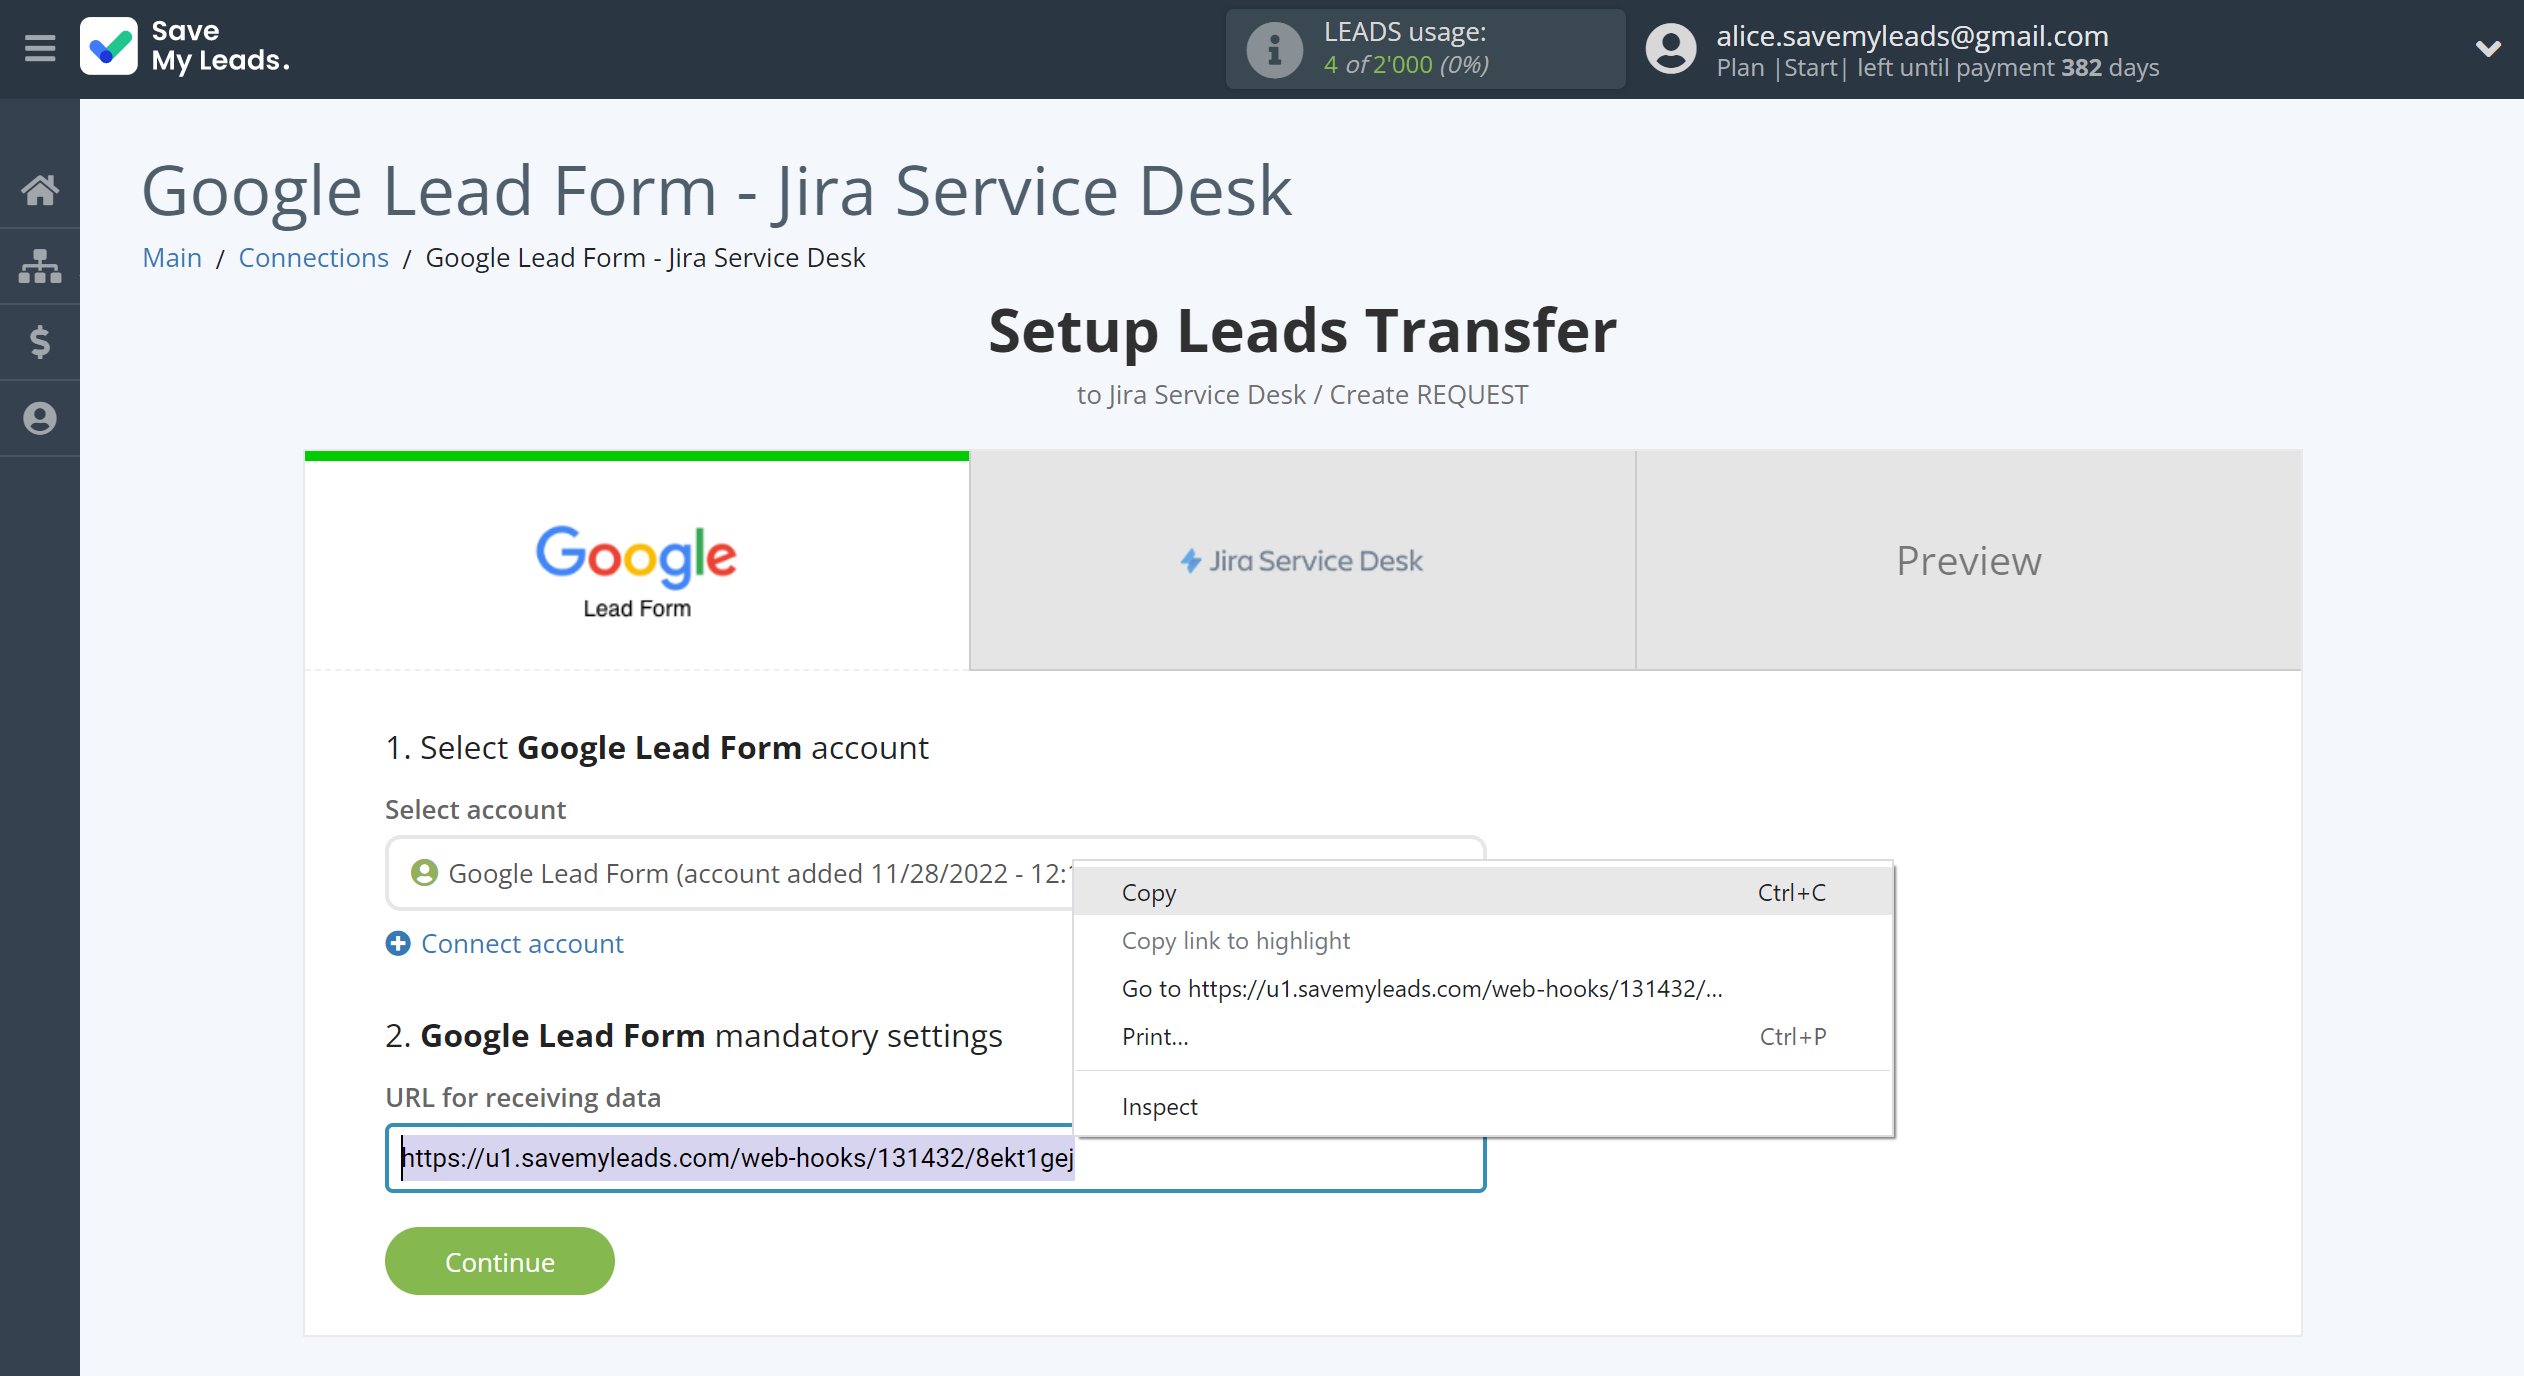 How to Connect Google Lead Form with Jira Service Desk | Data Source account connection